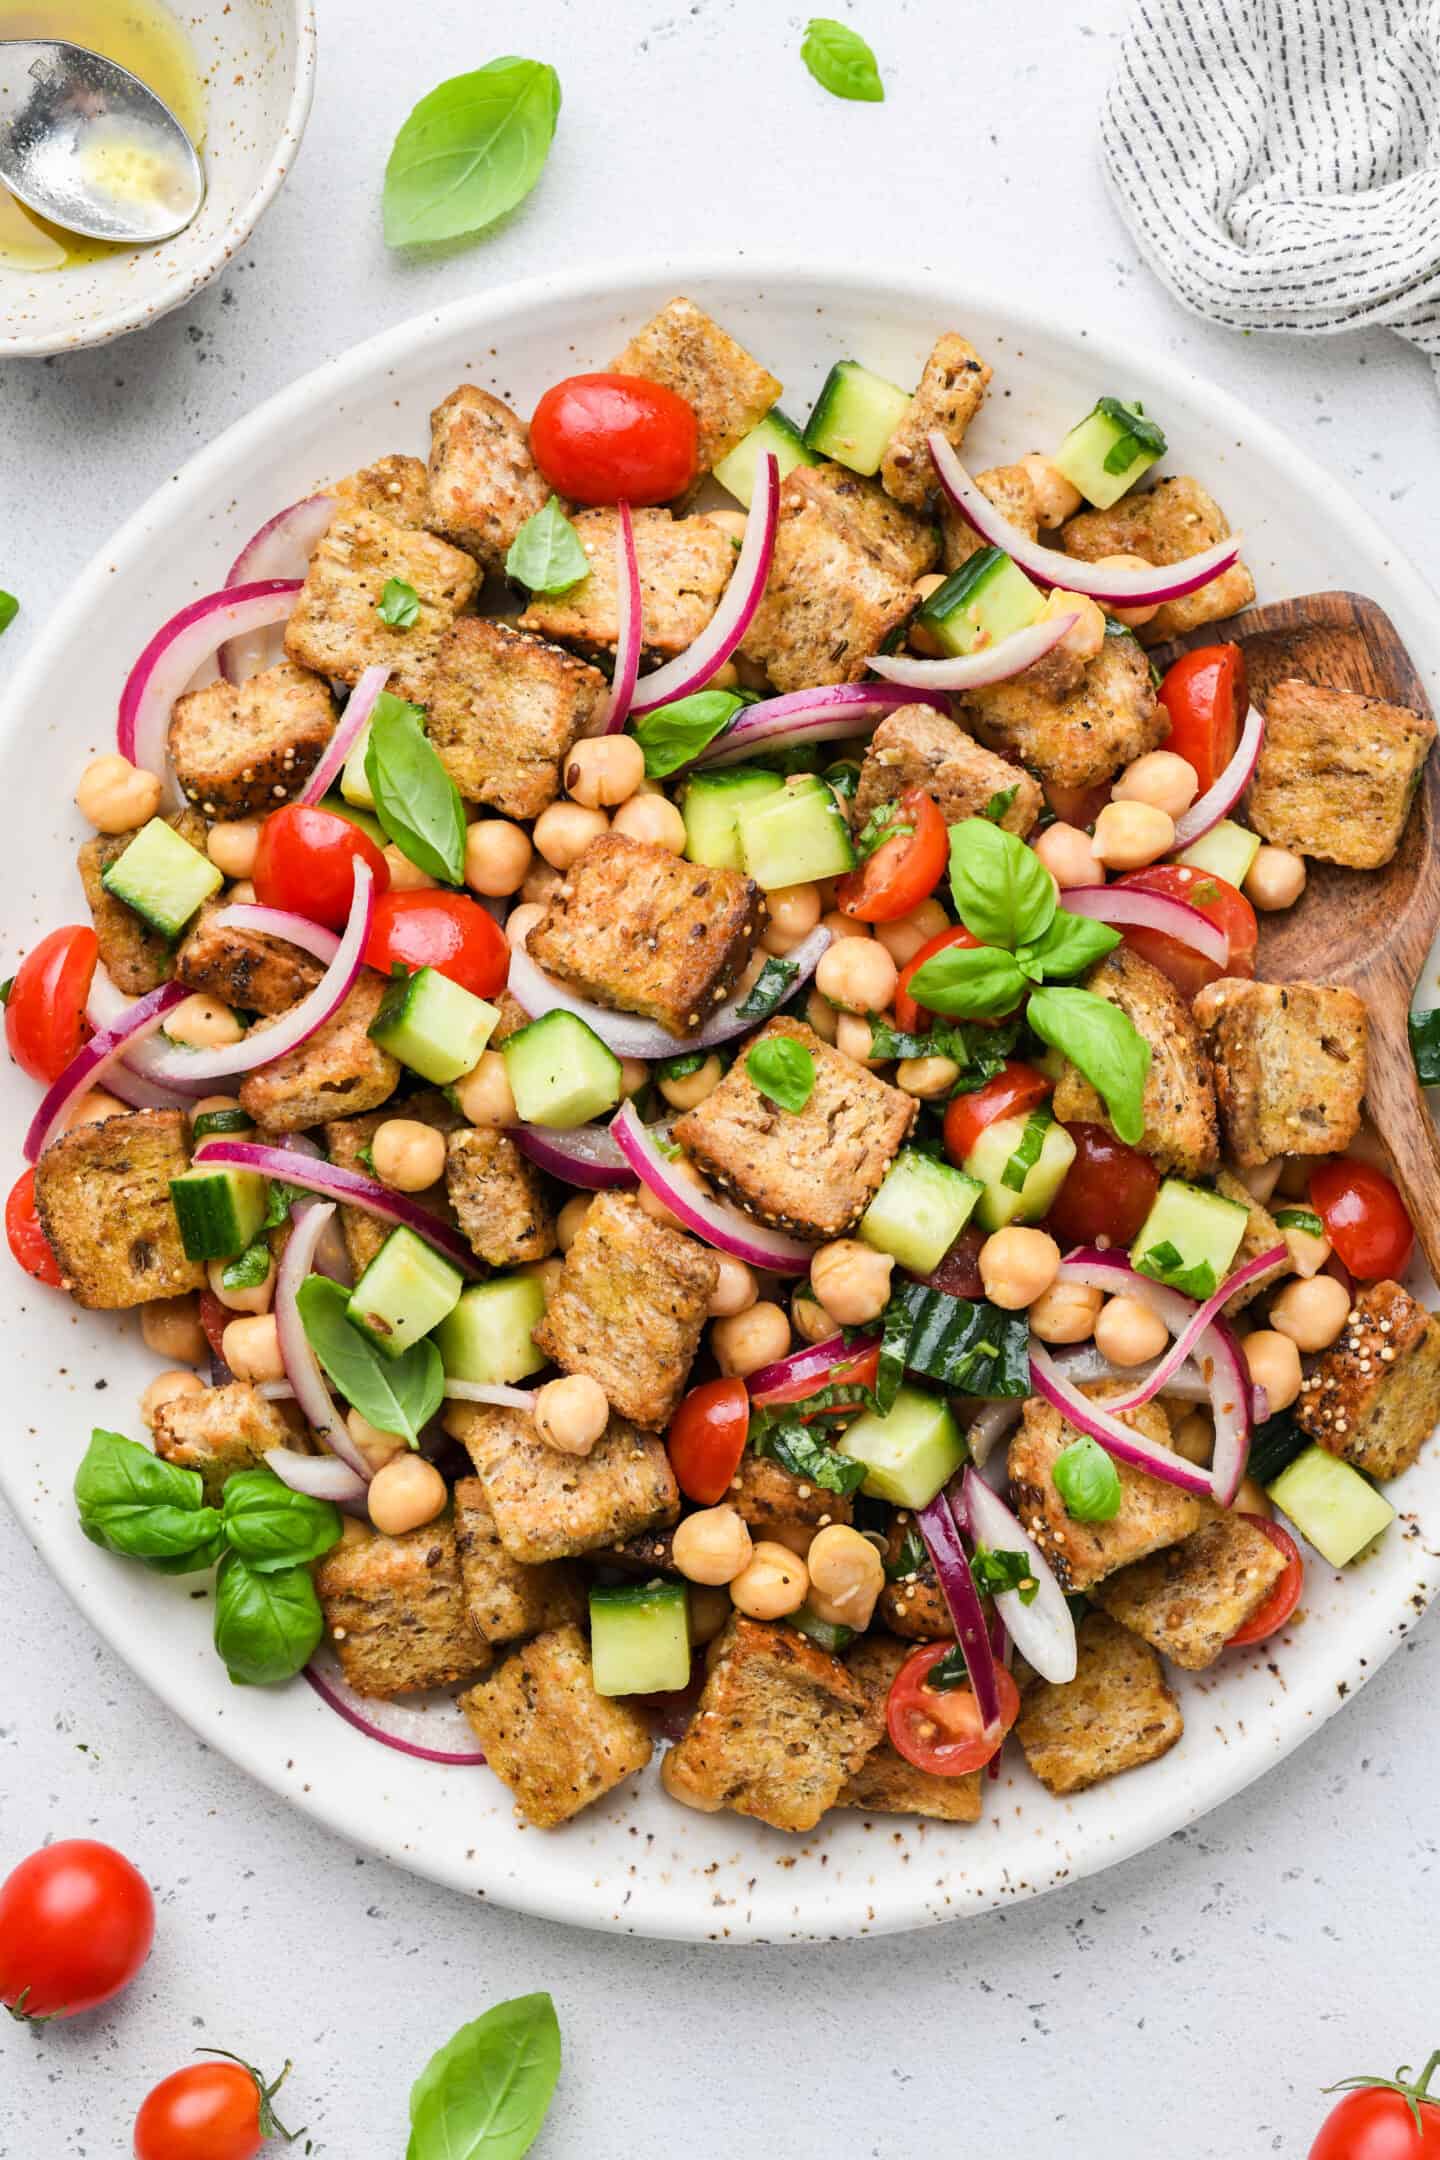 Overhead view of chickpea panzanella salad on white serving platter